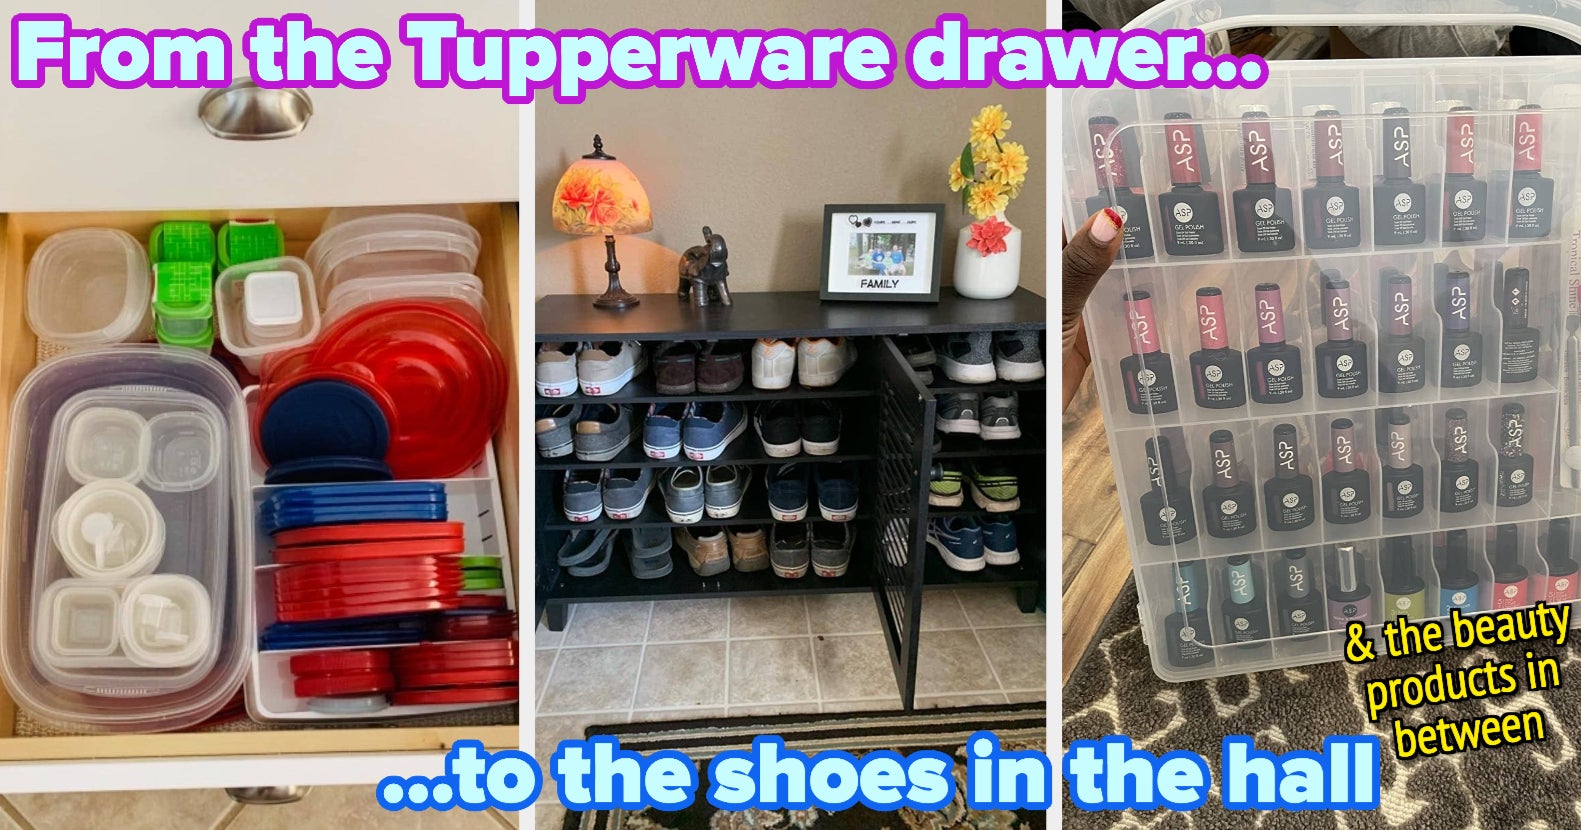 How to Organize Tupperware No Matter Where You Store It